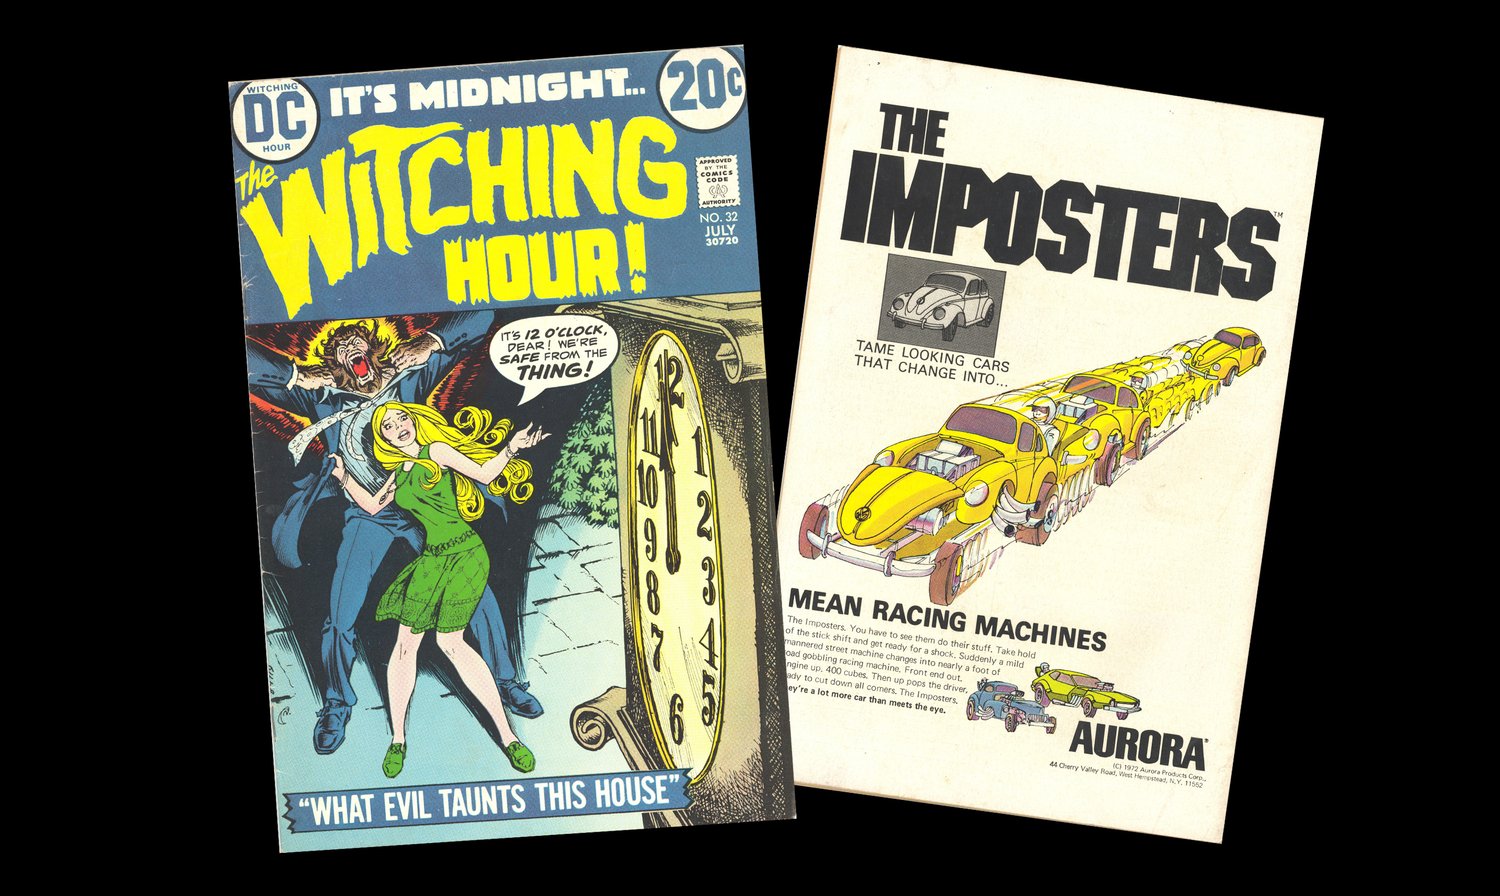 The Witching Hour Comic Book #32